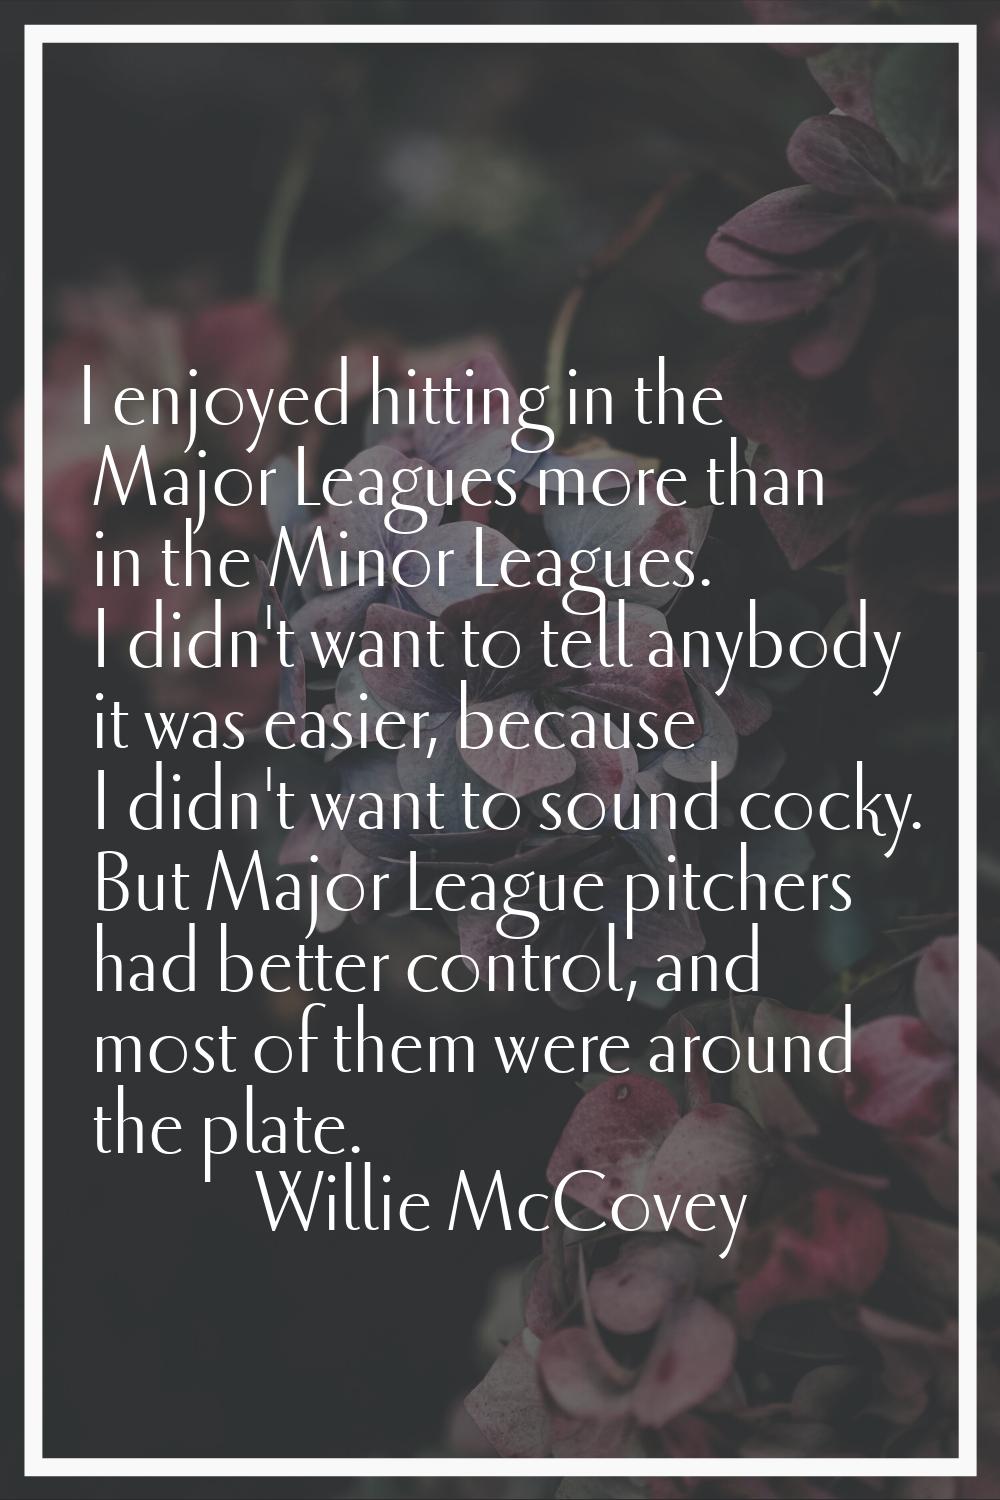 I enjoyed hitting in the Major Leagues more than in the Minor Leagues. I didn't want to tell anybod